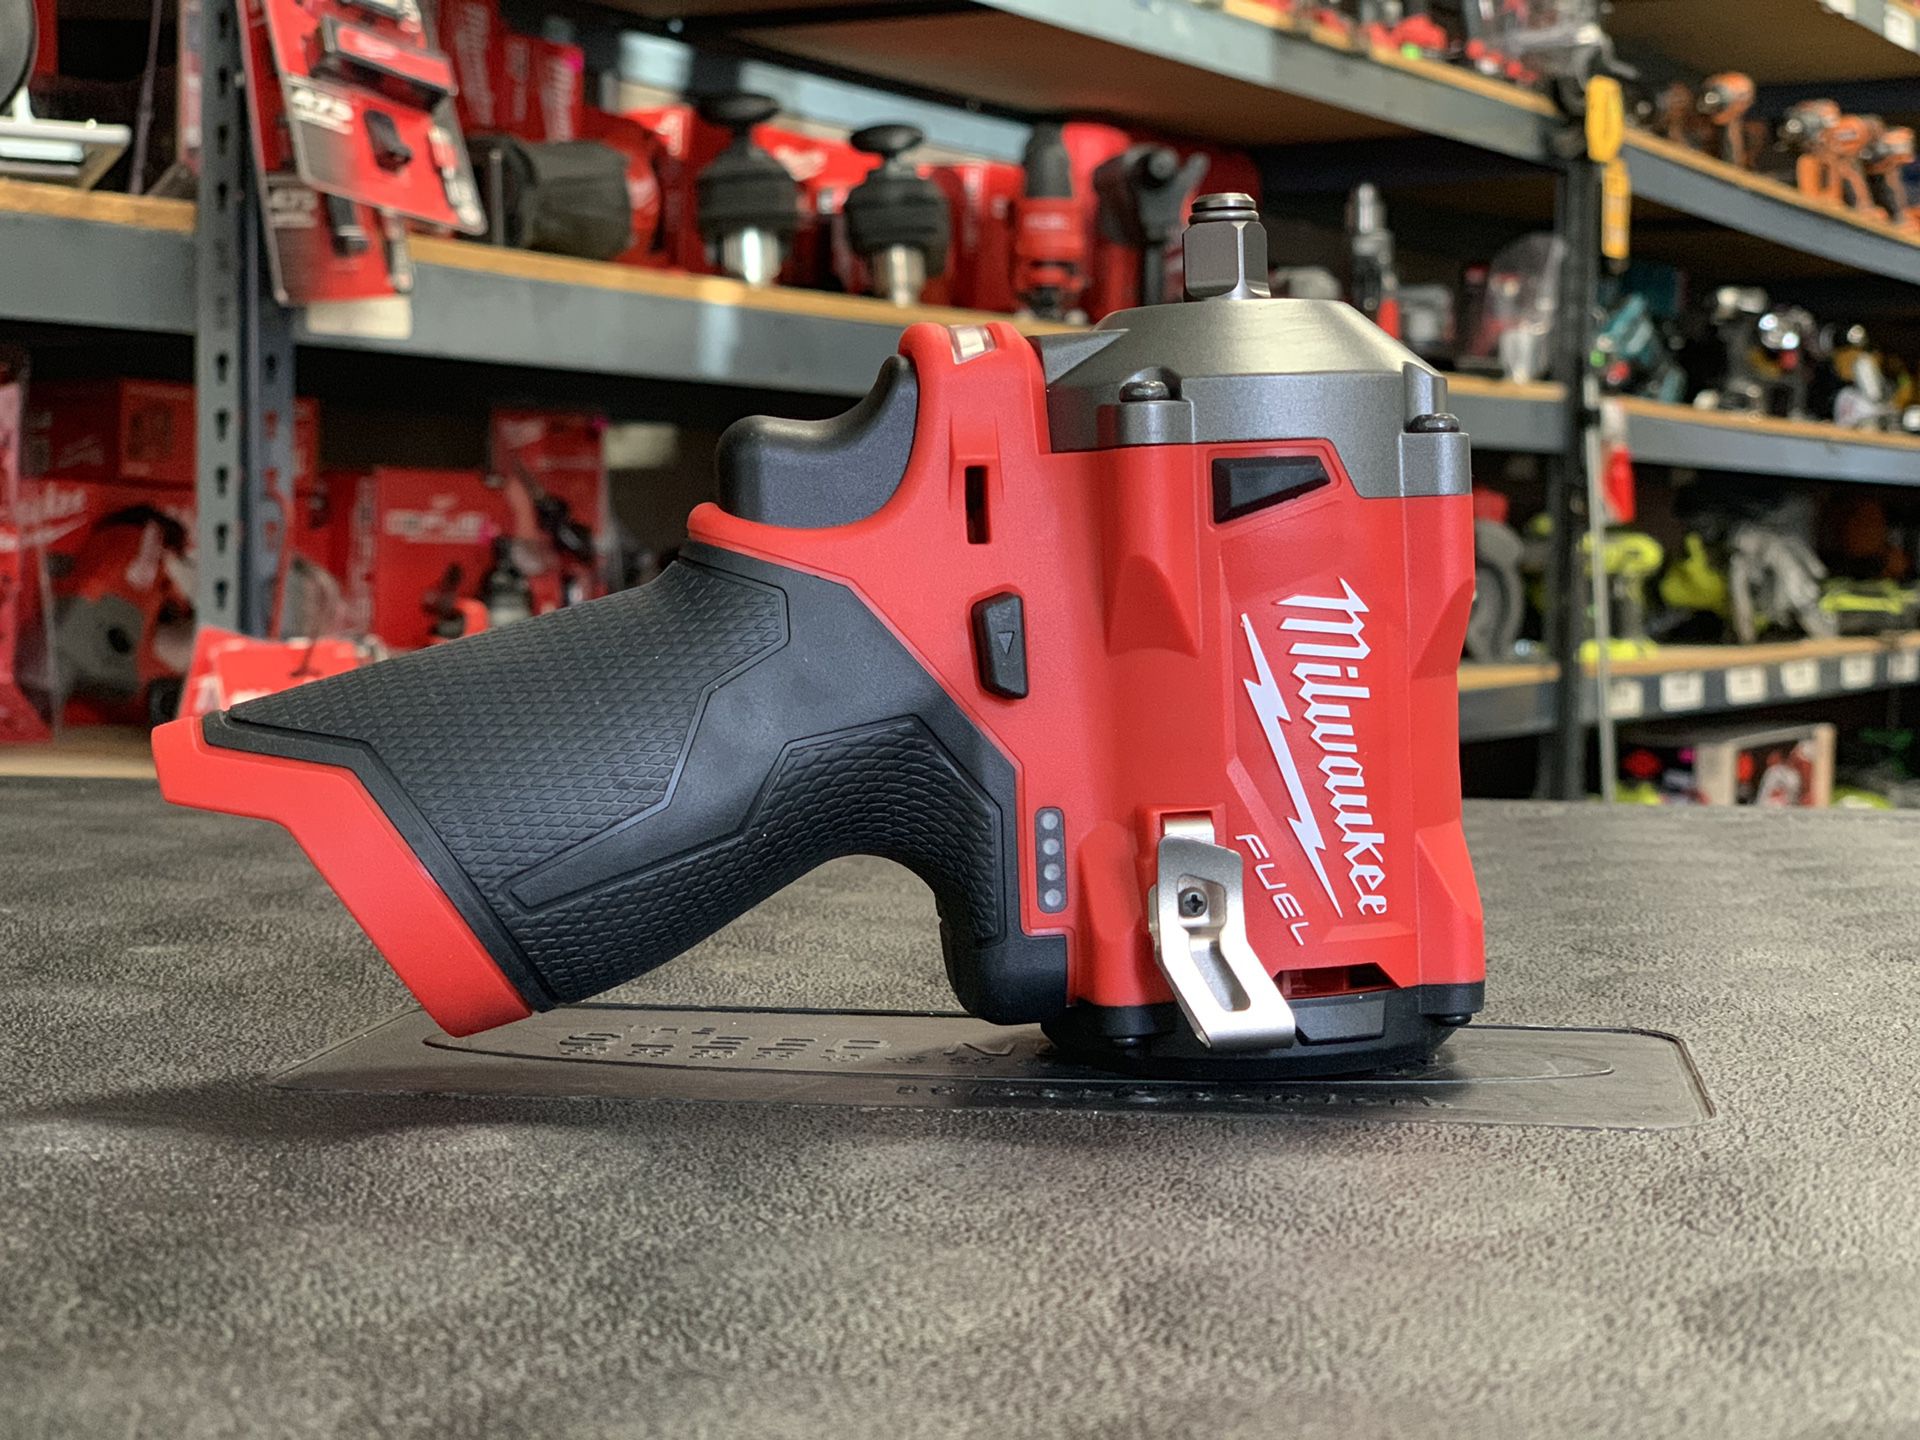 MILWAUKEE M12 FUEL CORDLESS STUBBY 3/8in IMPACT WRENCH NO BATTERY OR CHARGER INCLUDED TOOL ONLY SOLO LA HERRAMIENTA